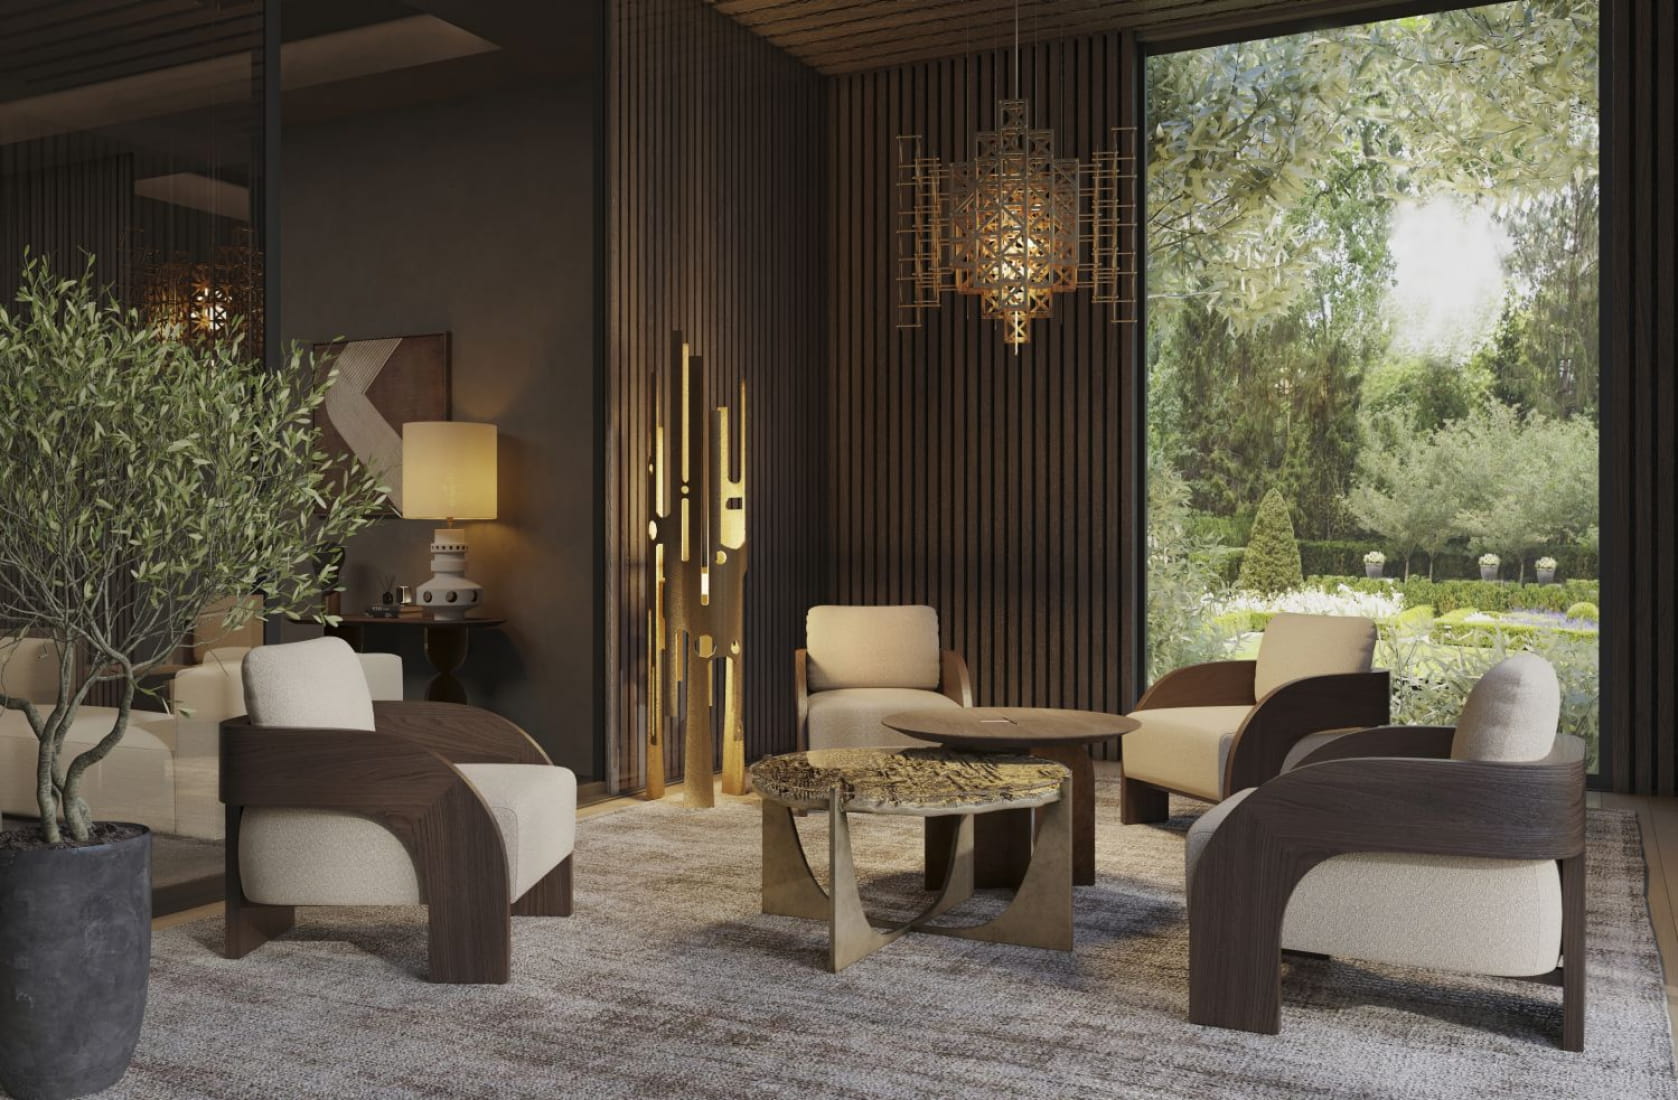 3d-interior-showcase-for-furniture-brand-by-pixready